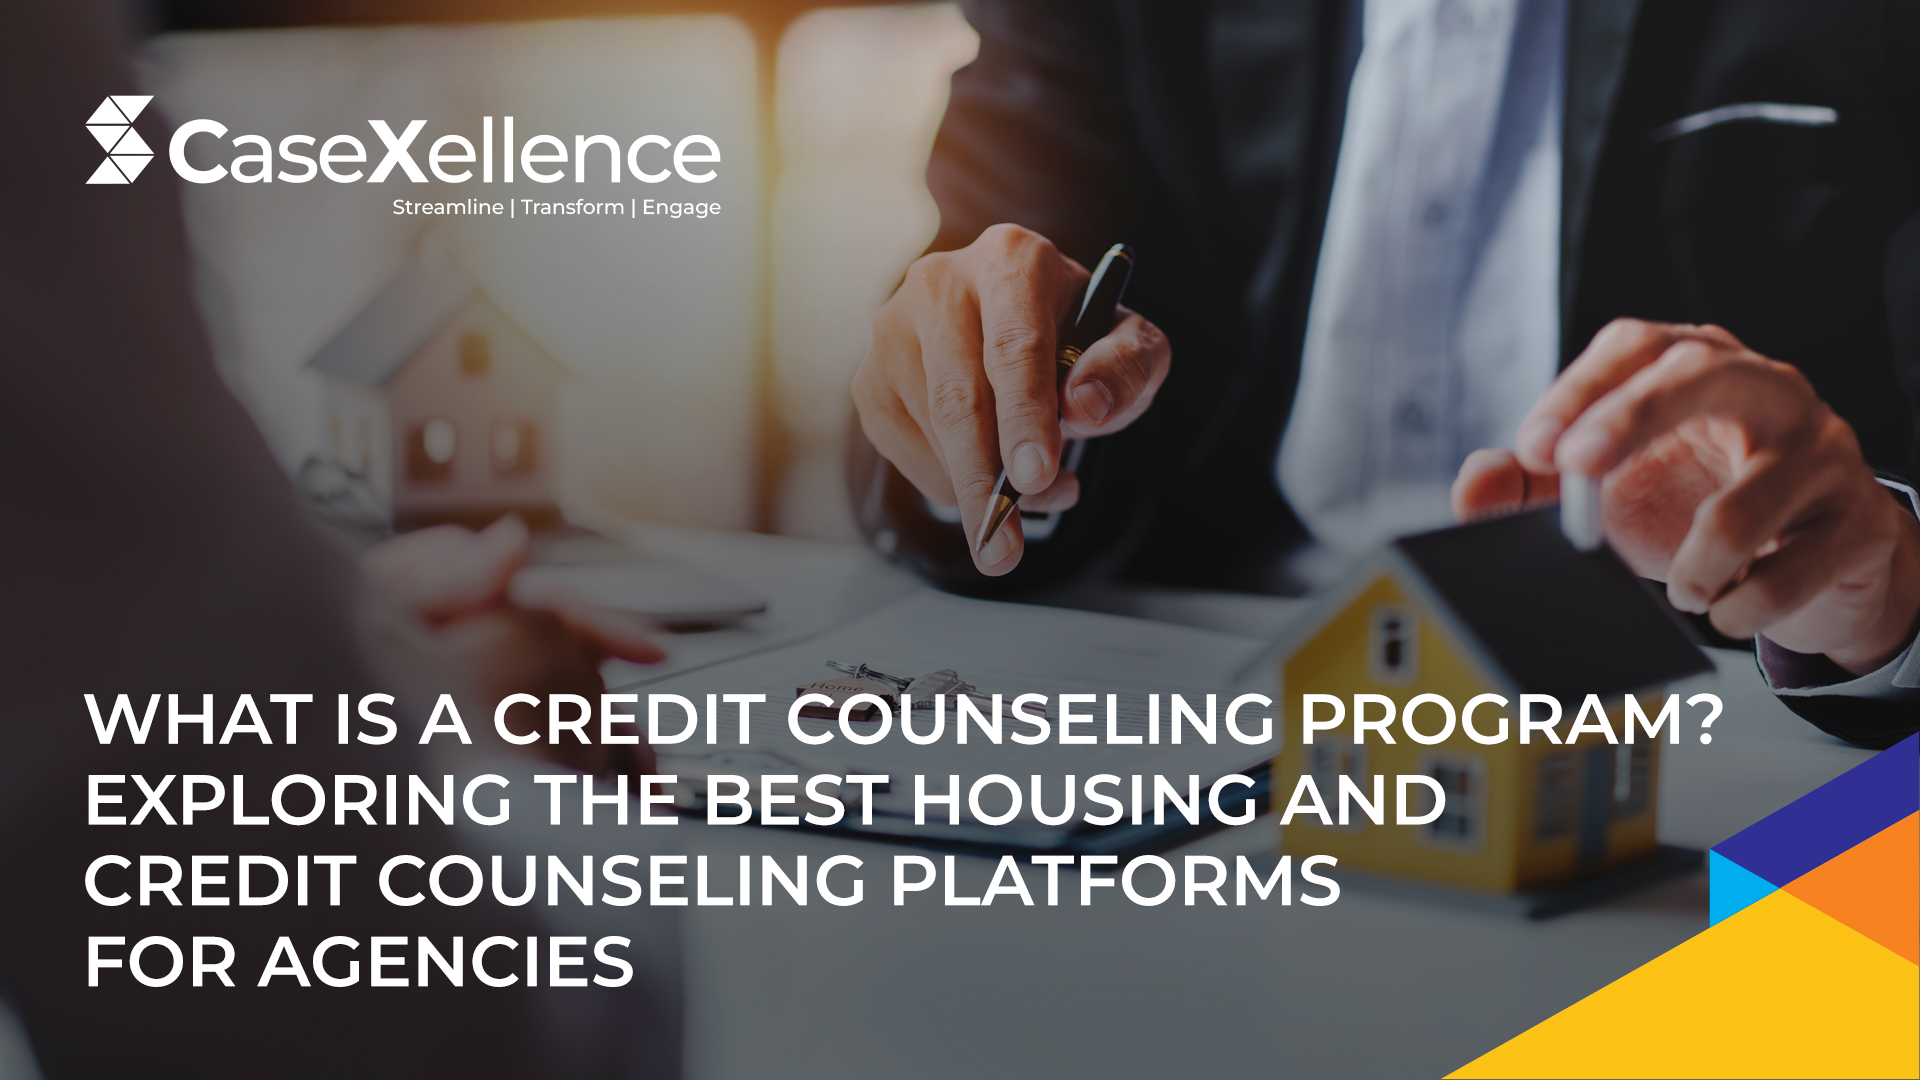 What is a Credit Counseling Program? Exploring the Best Housing and Credit Counseling Platforms for Agencies